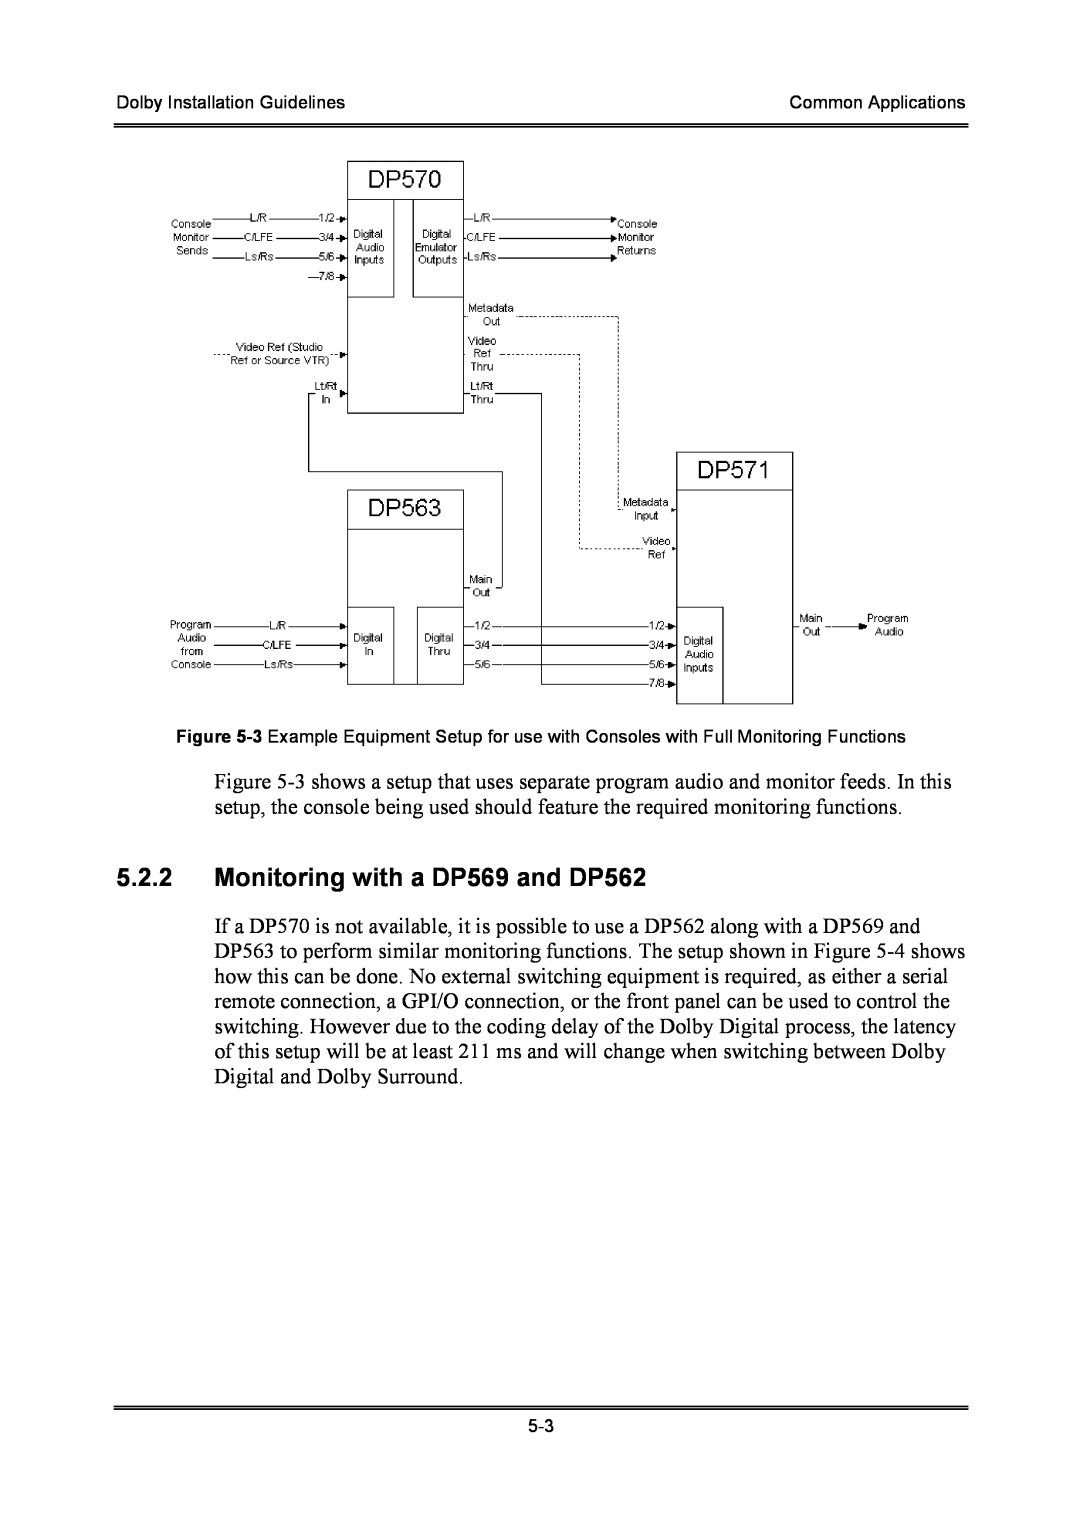 Dolby Laboratories S01/13621 5.2.2Monitoring with a DP569 and DP562, Dolby Installation Guidelines, Common Applications 